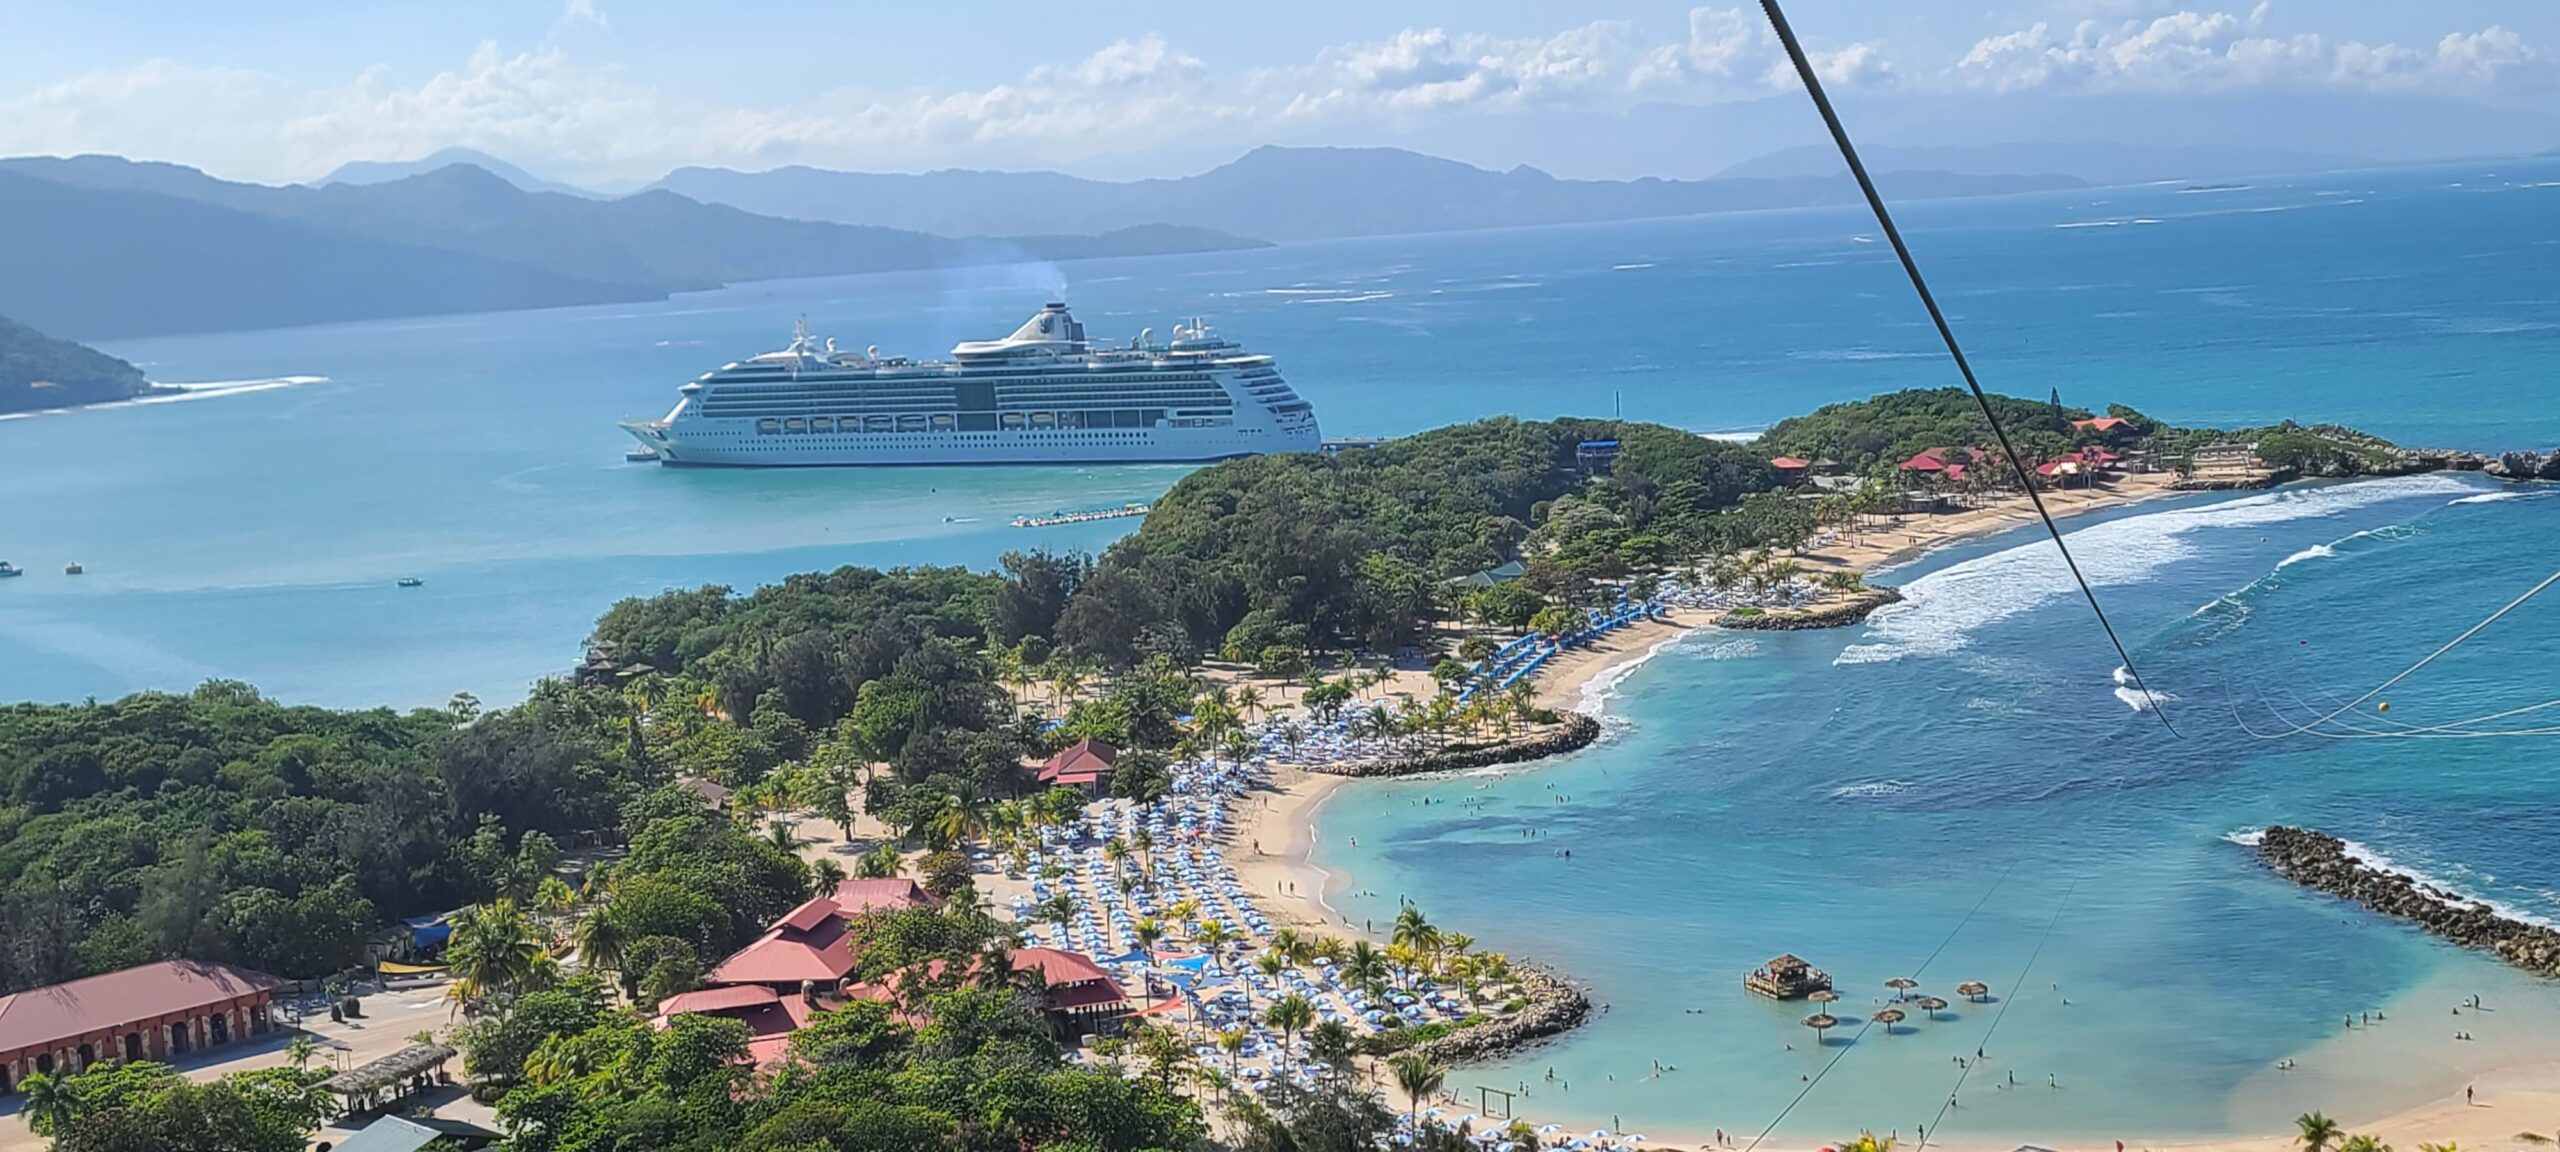 My view from the Dragon's Breath zip line launch platform in Labadee, Haiti.